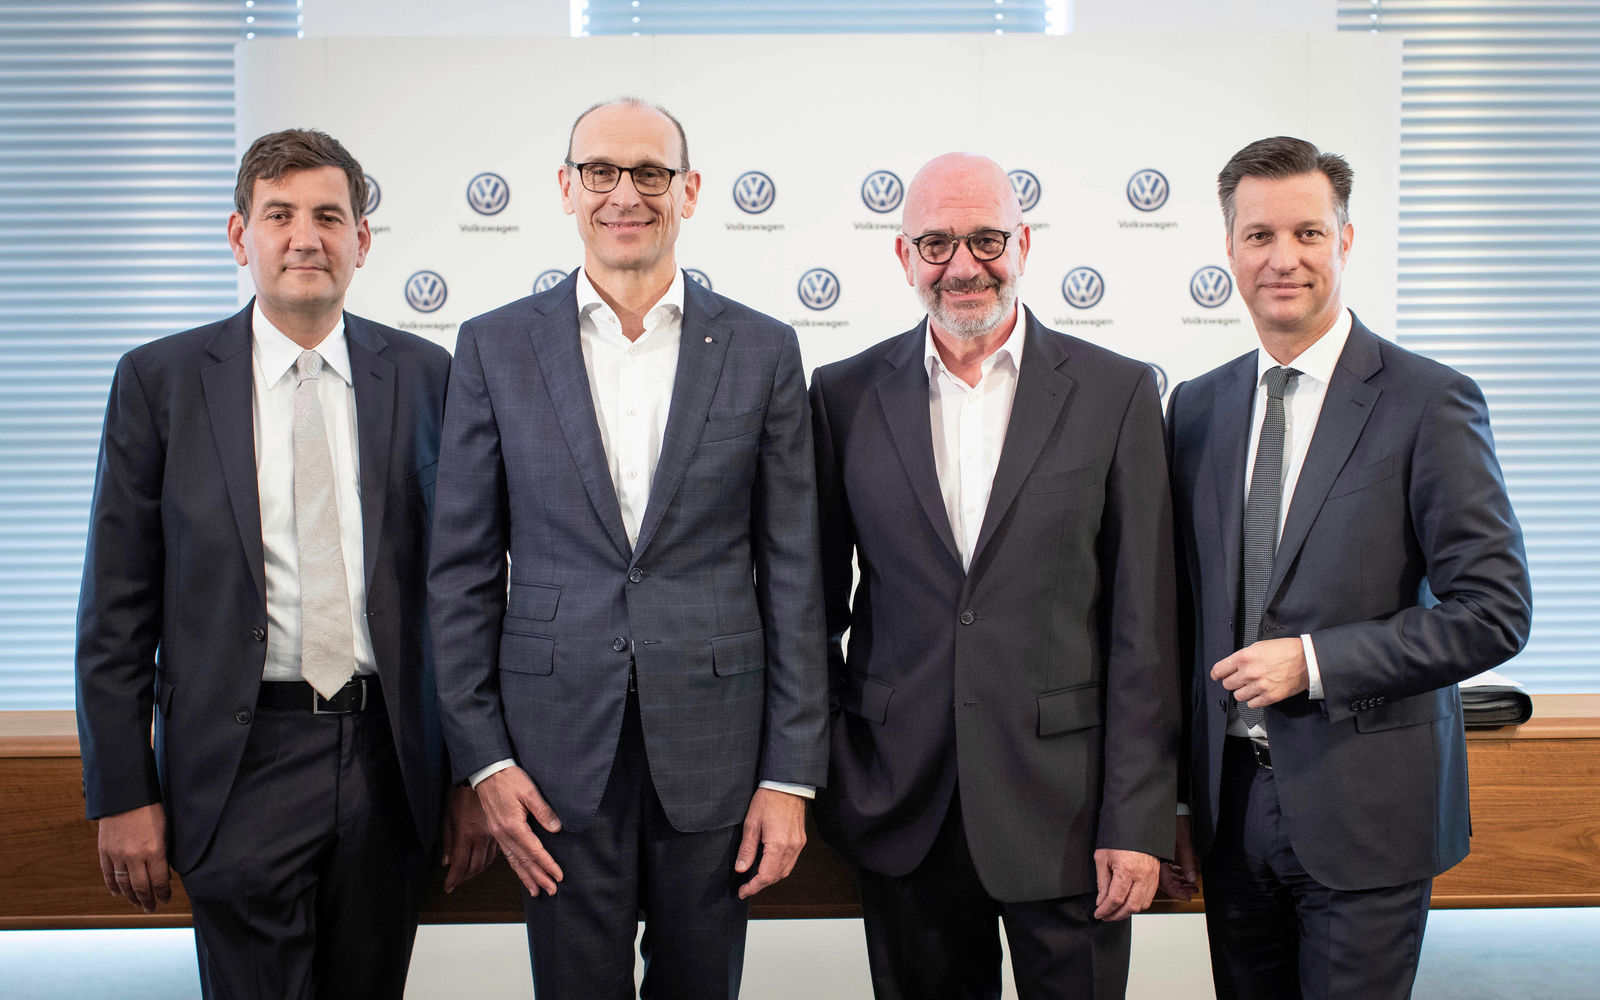 Volkswagen agrees digital transformation roadmap for administration and production